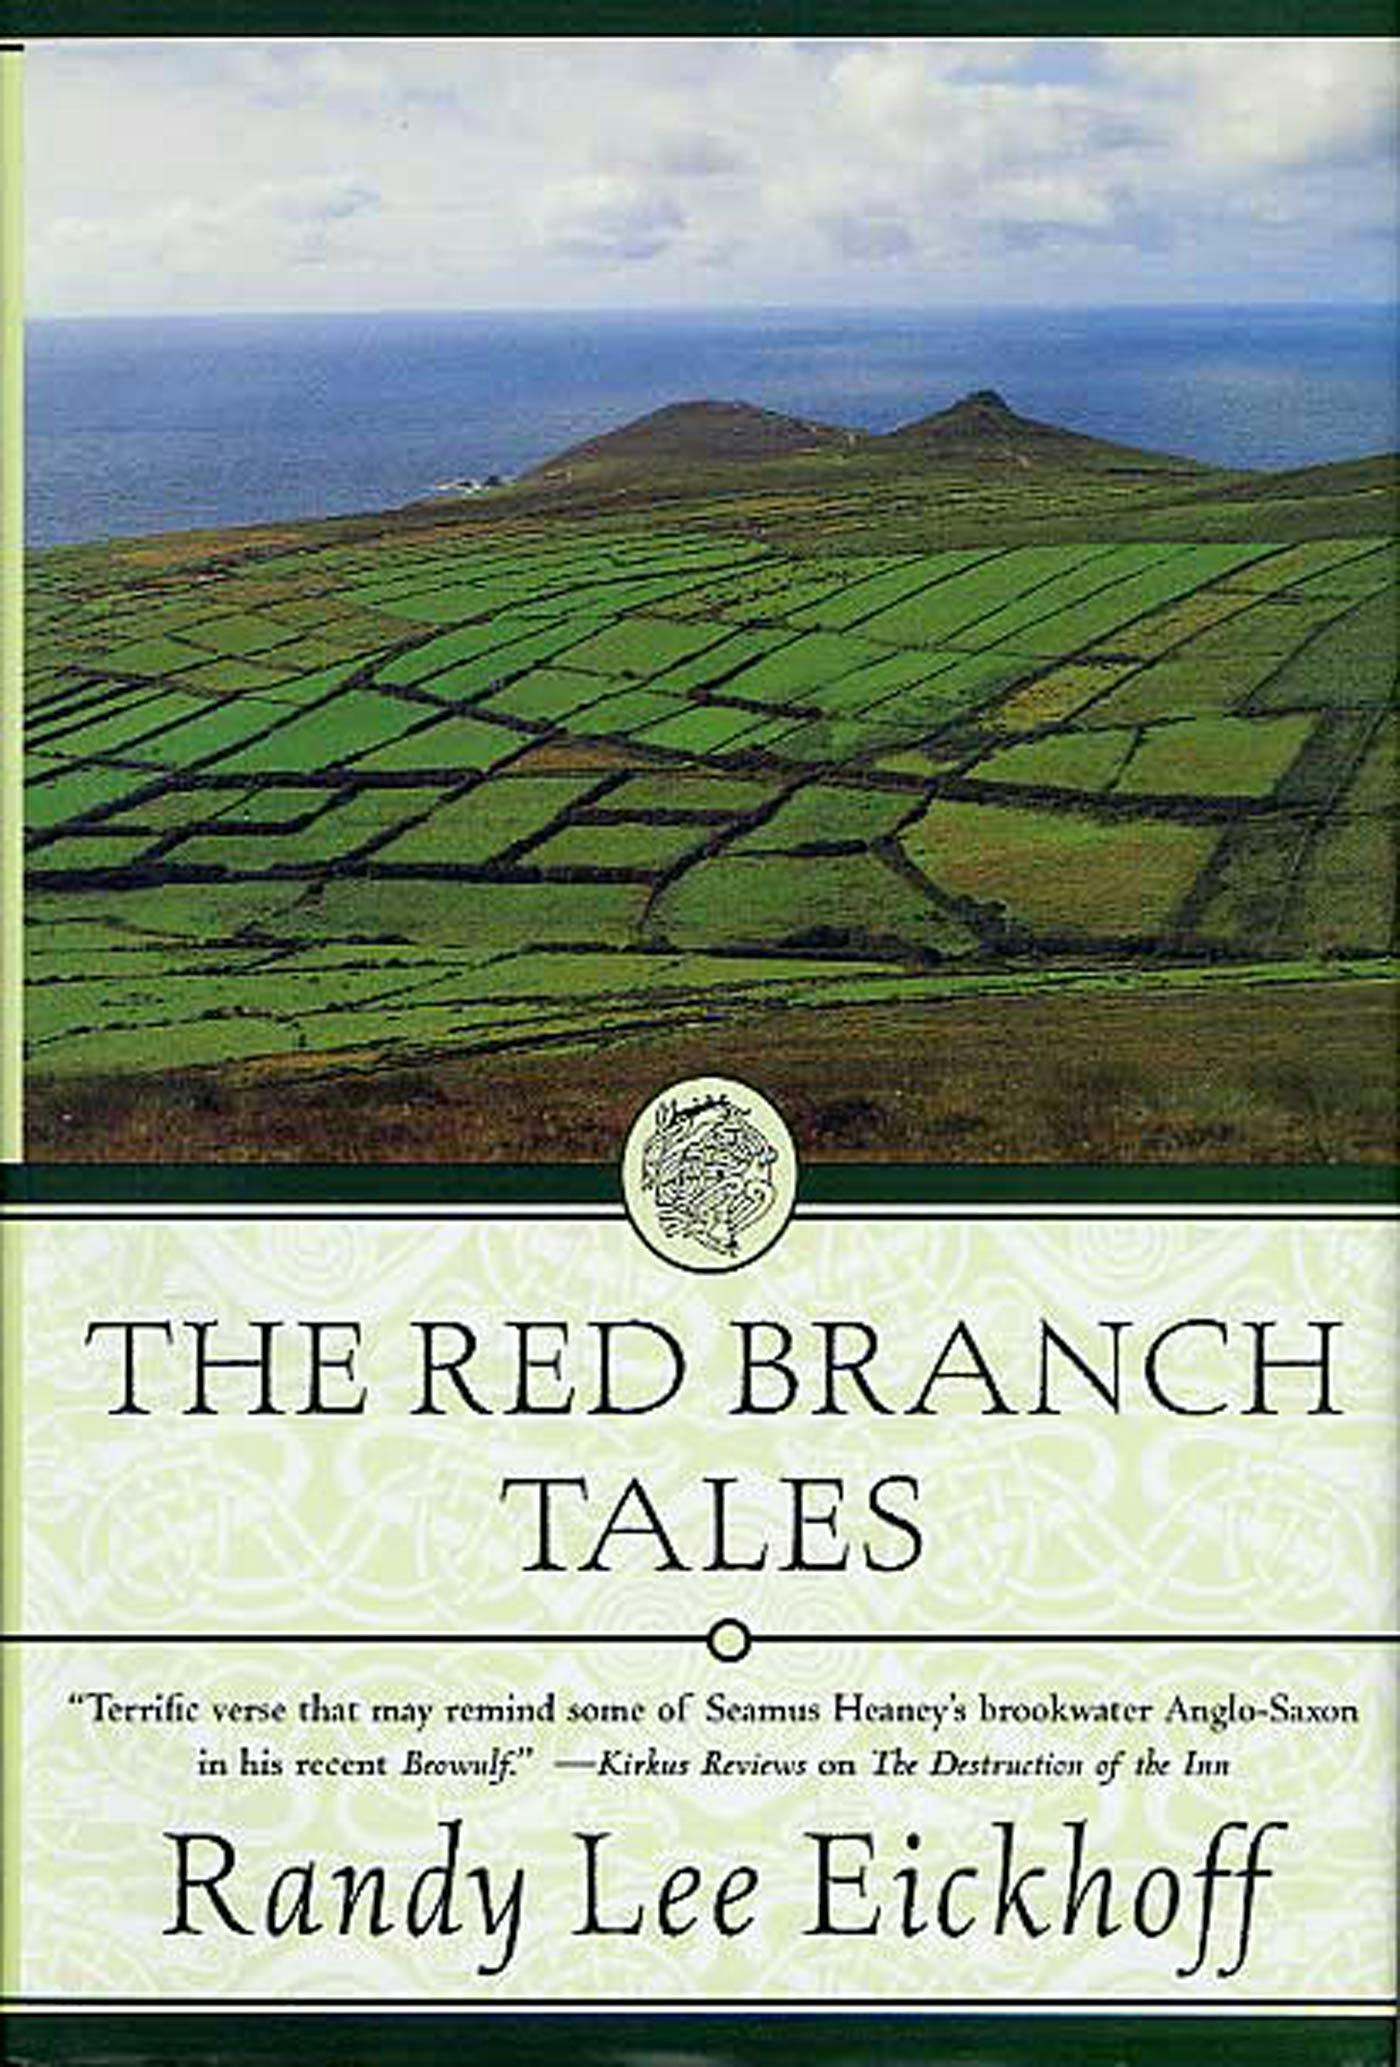 Cover for the book titled as: The Red Branch Tales